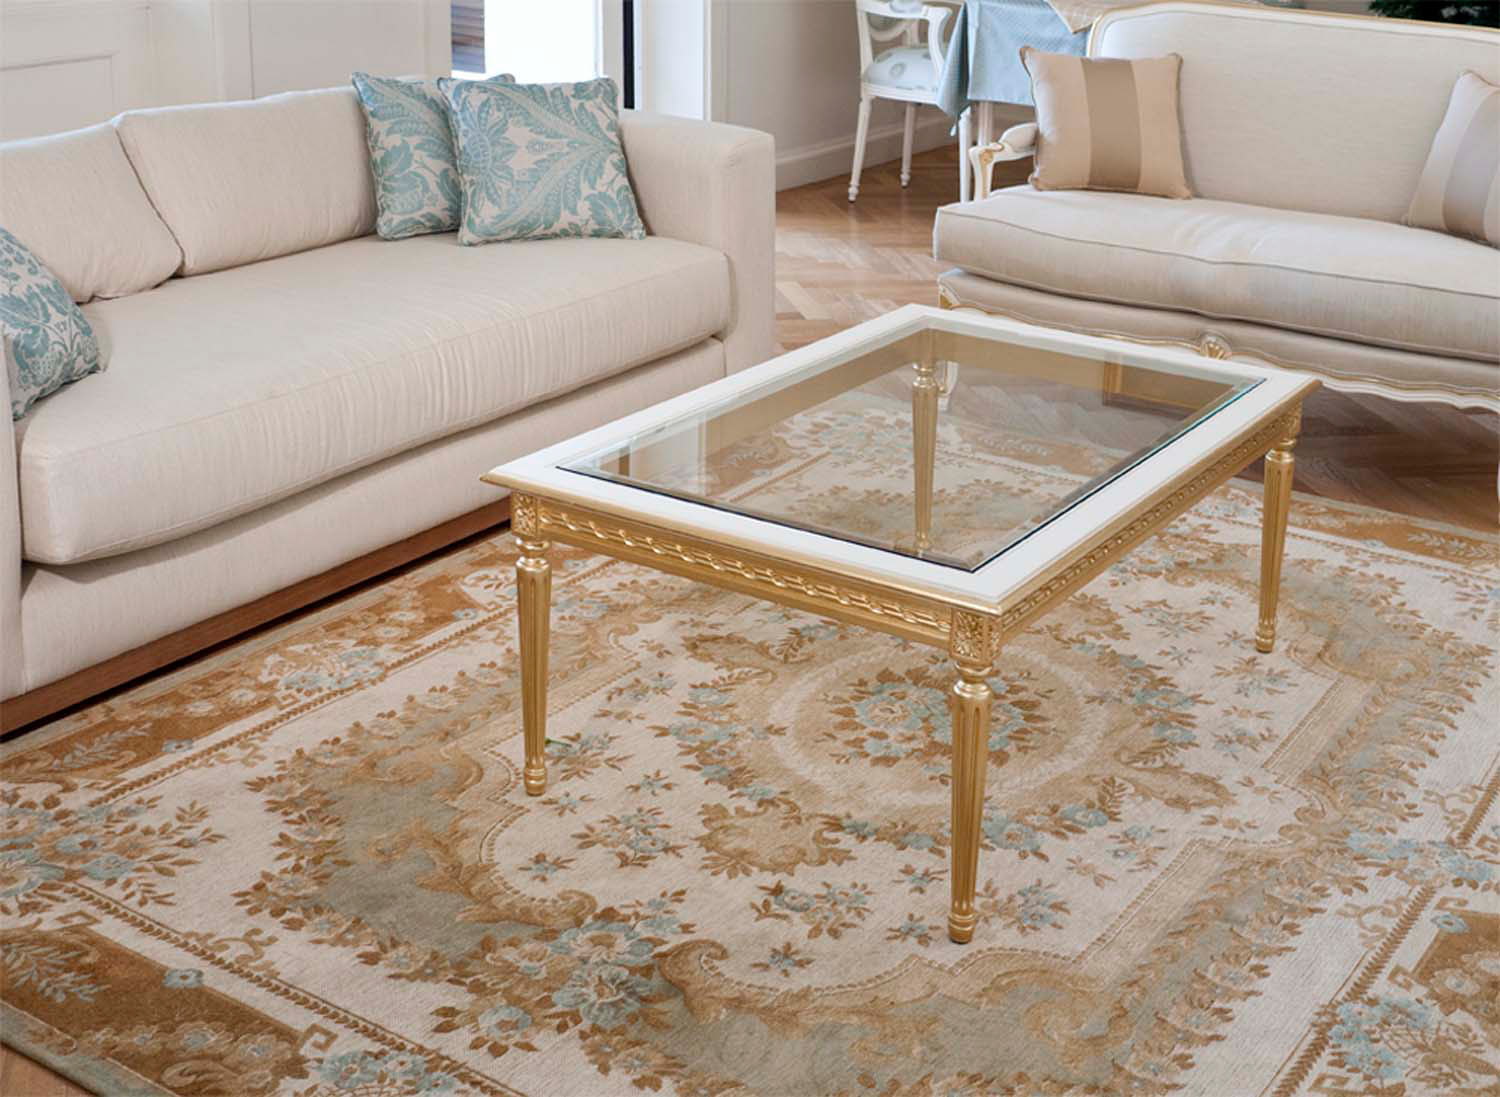 6 Louis XV1 coffee table with glass top and gold base with classical rug and sofas